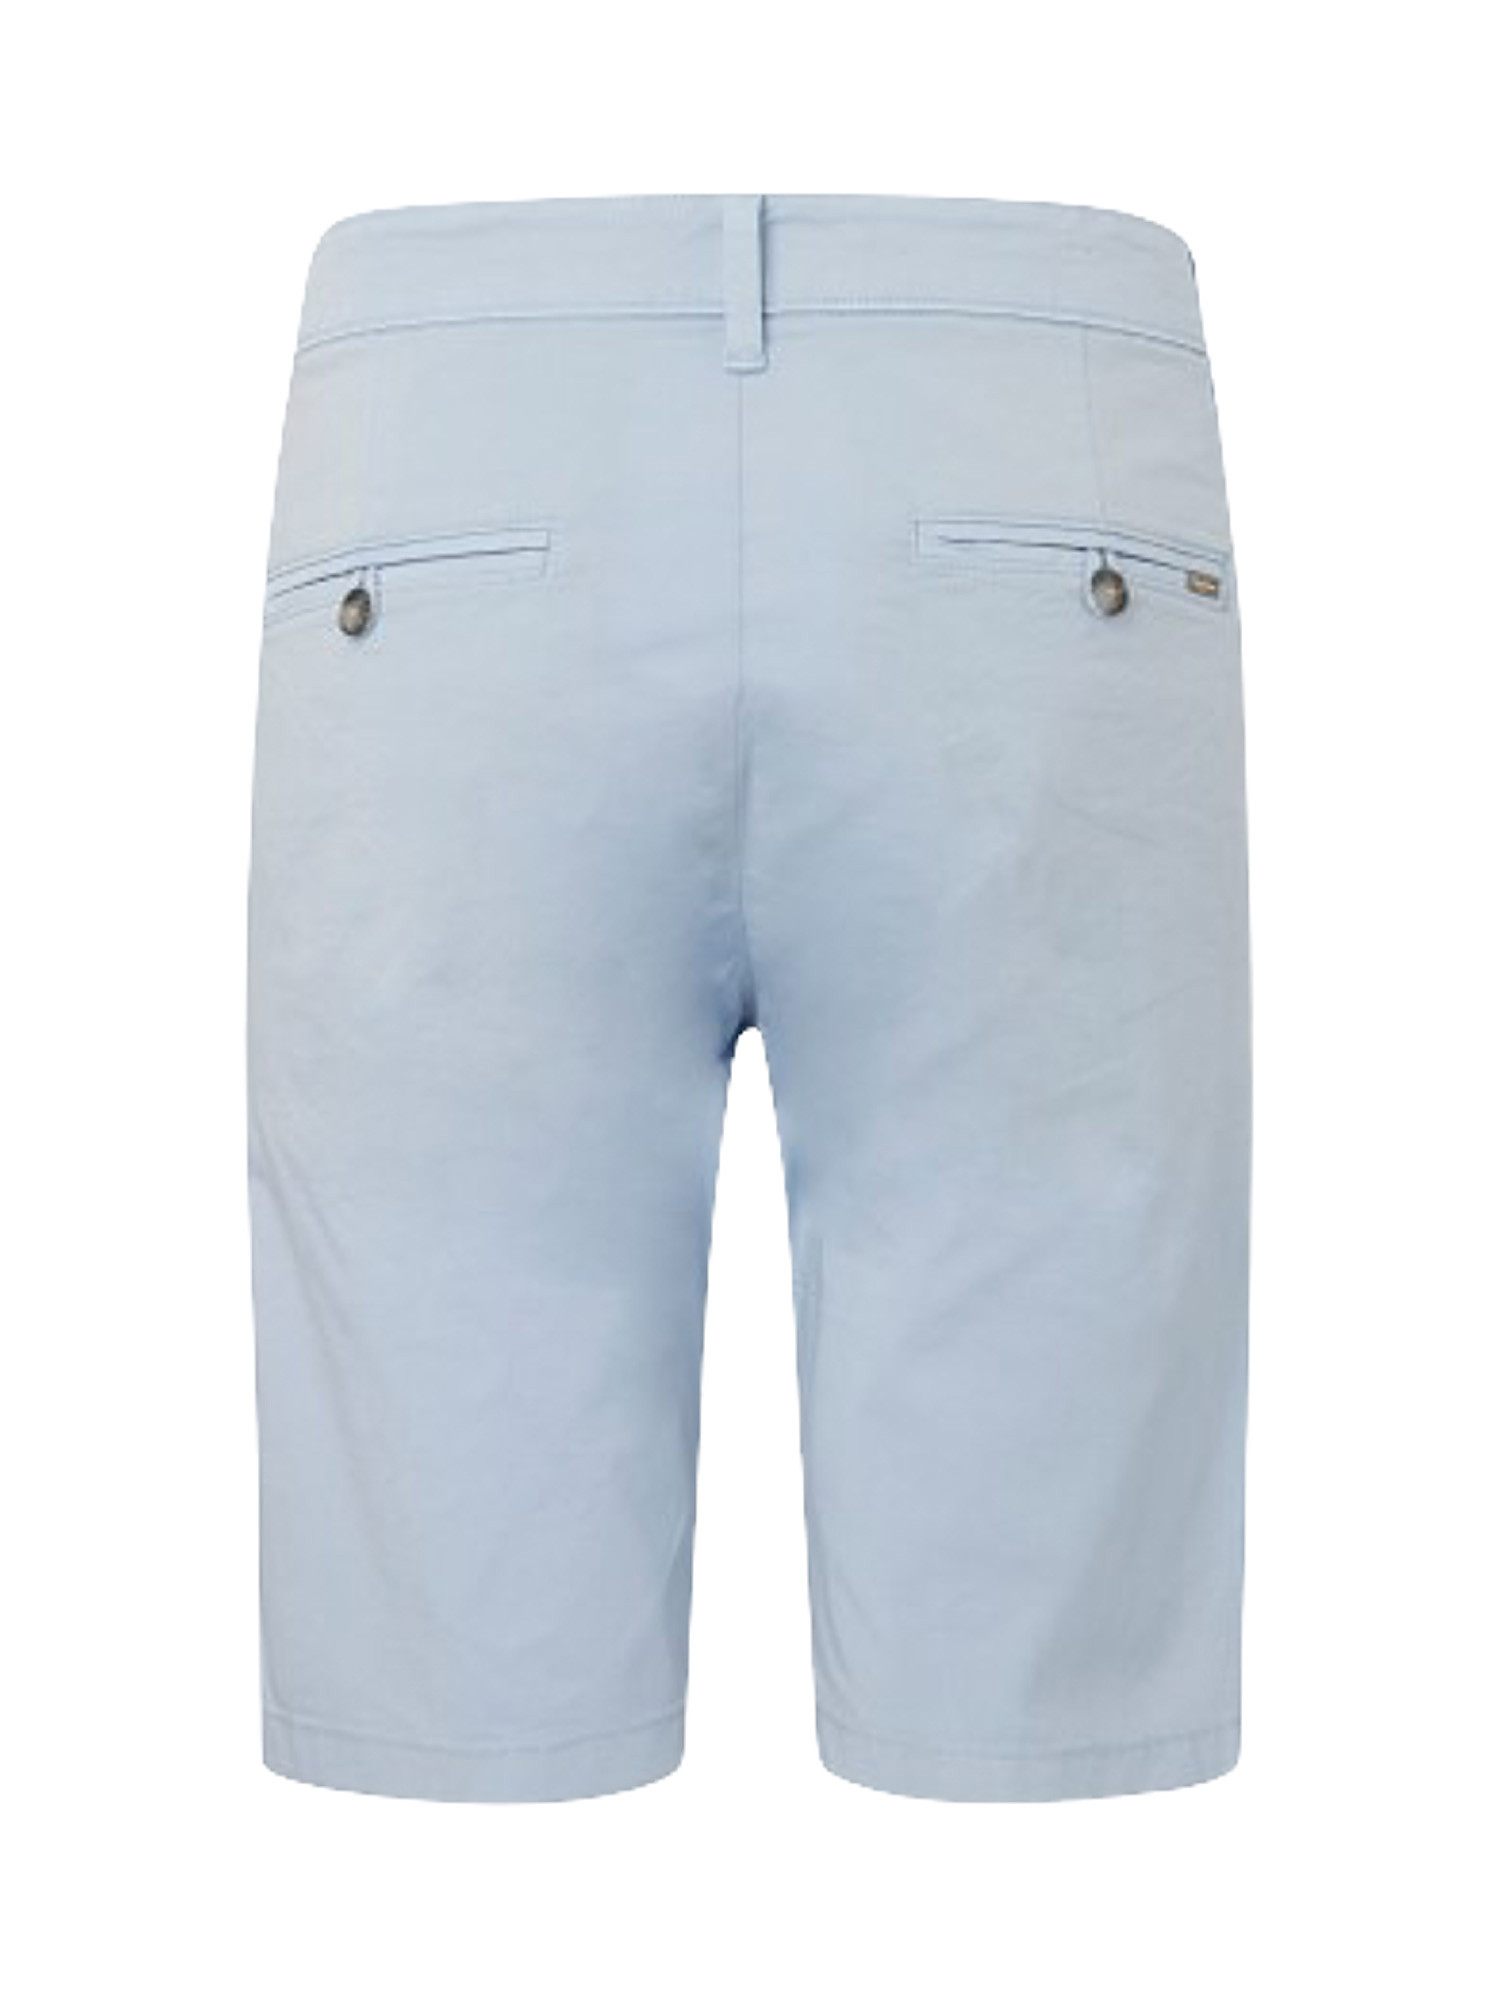 Mc queen  chino-style bermuda shorts, Light Blue, large image number 1